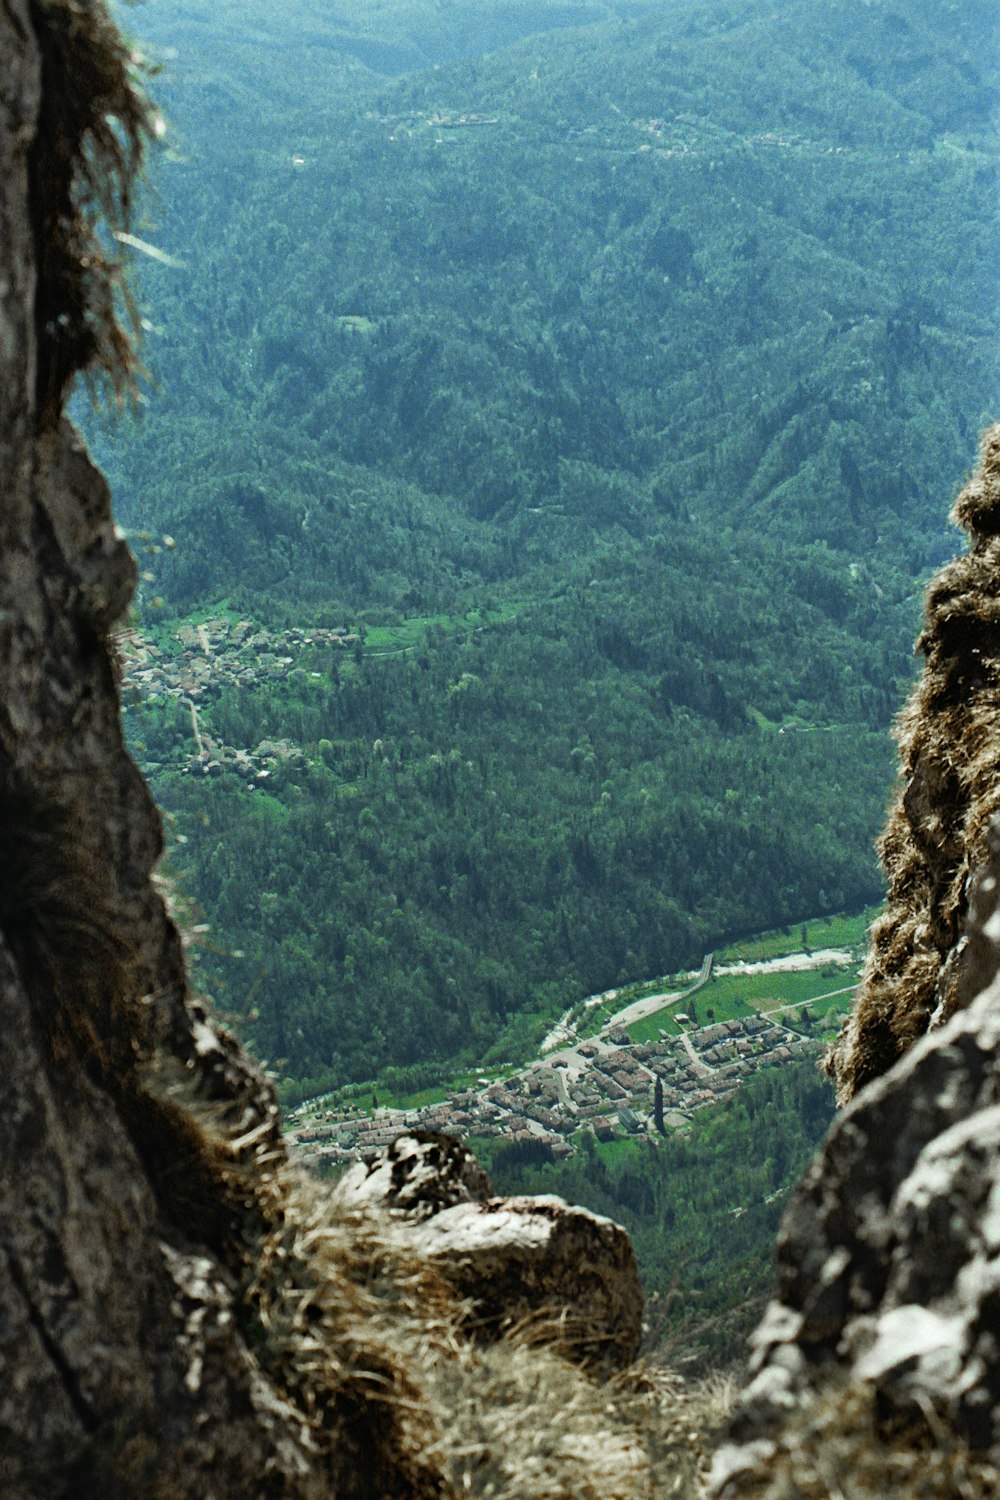 a view of a valley from a high point of view